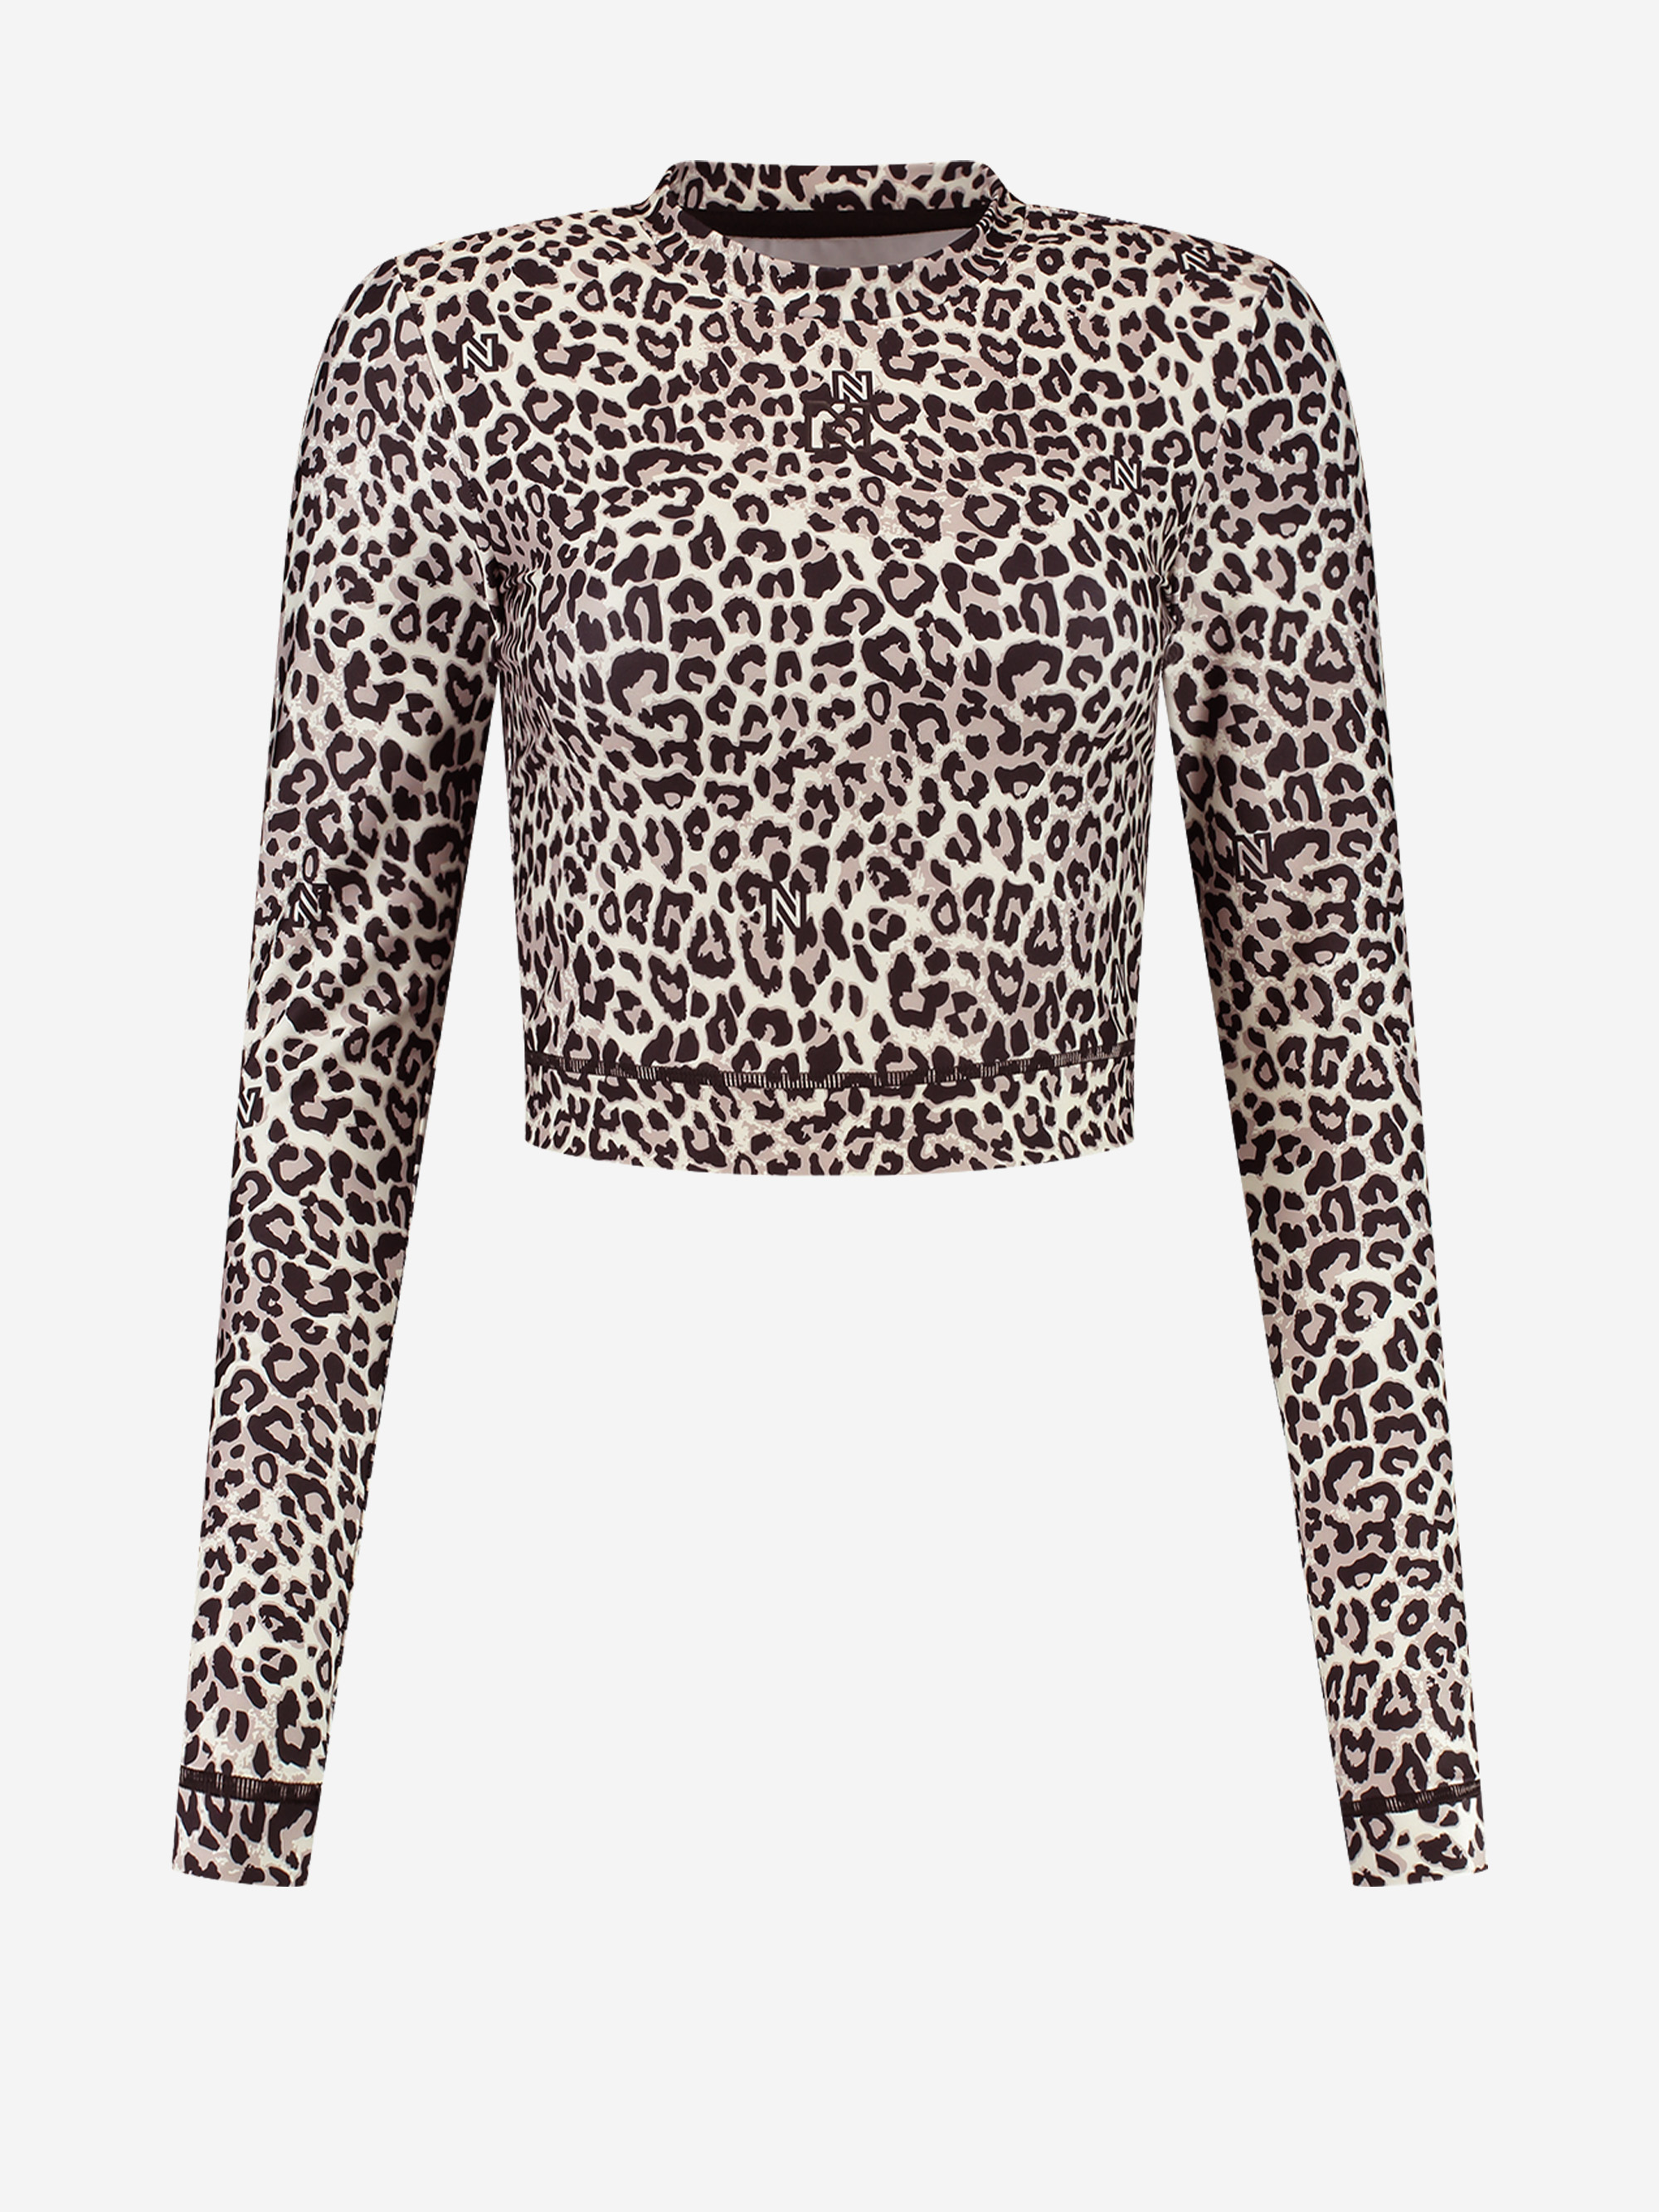 Cropped sport top with animal print